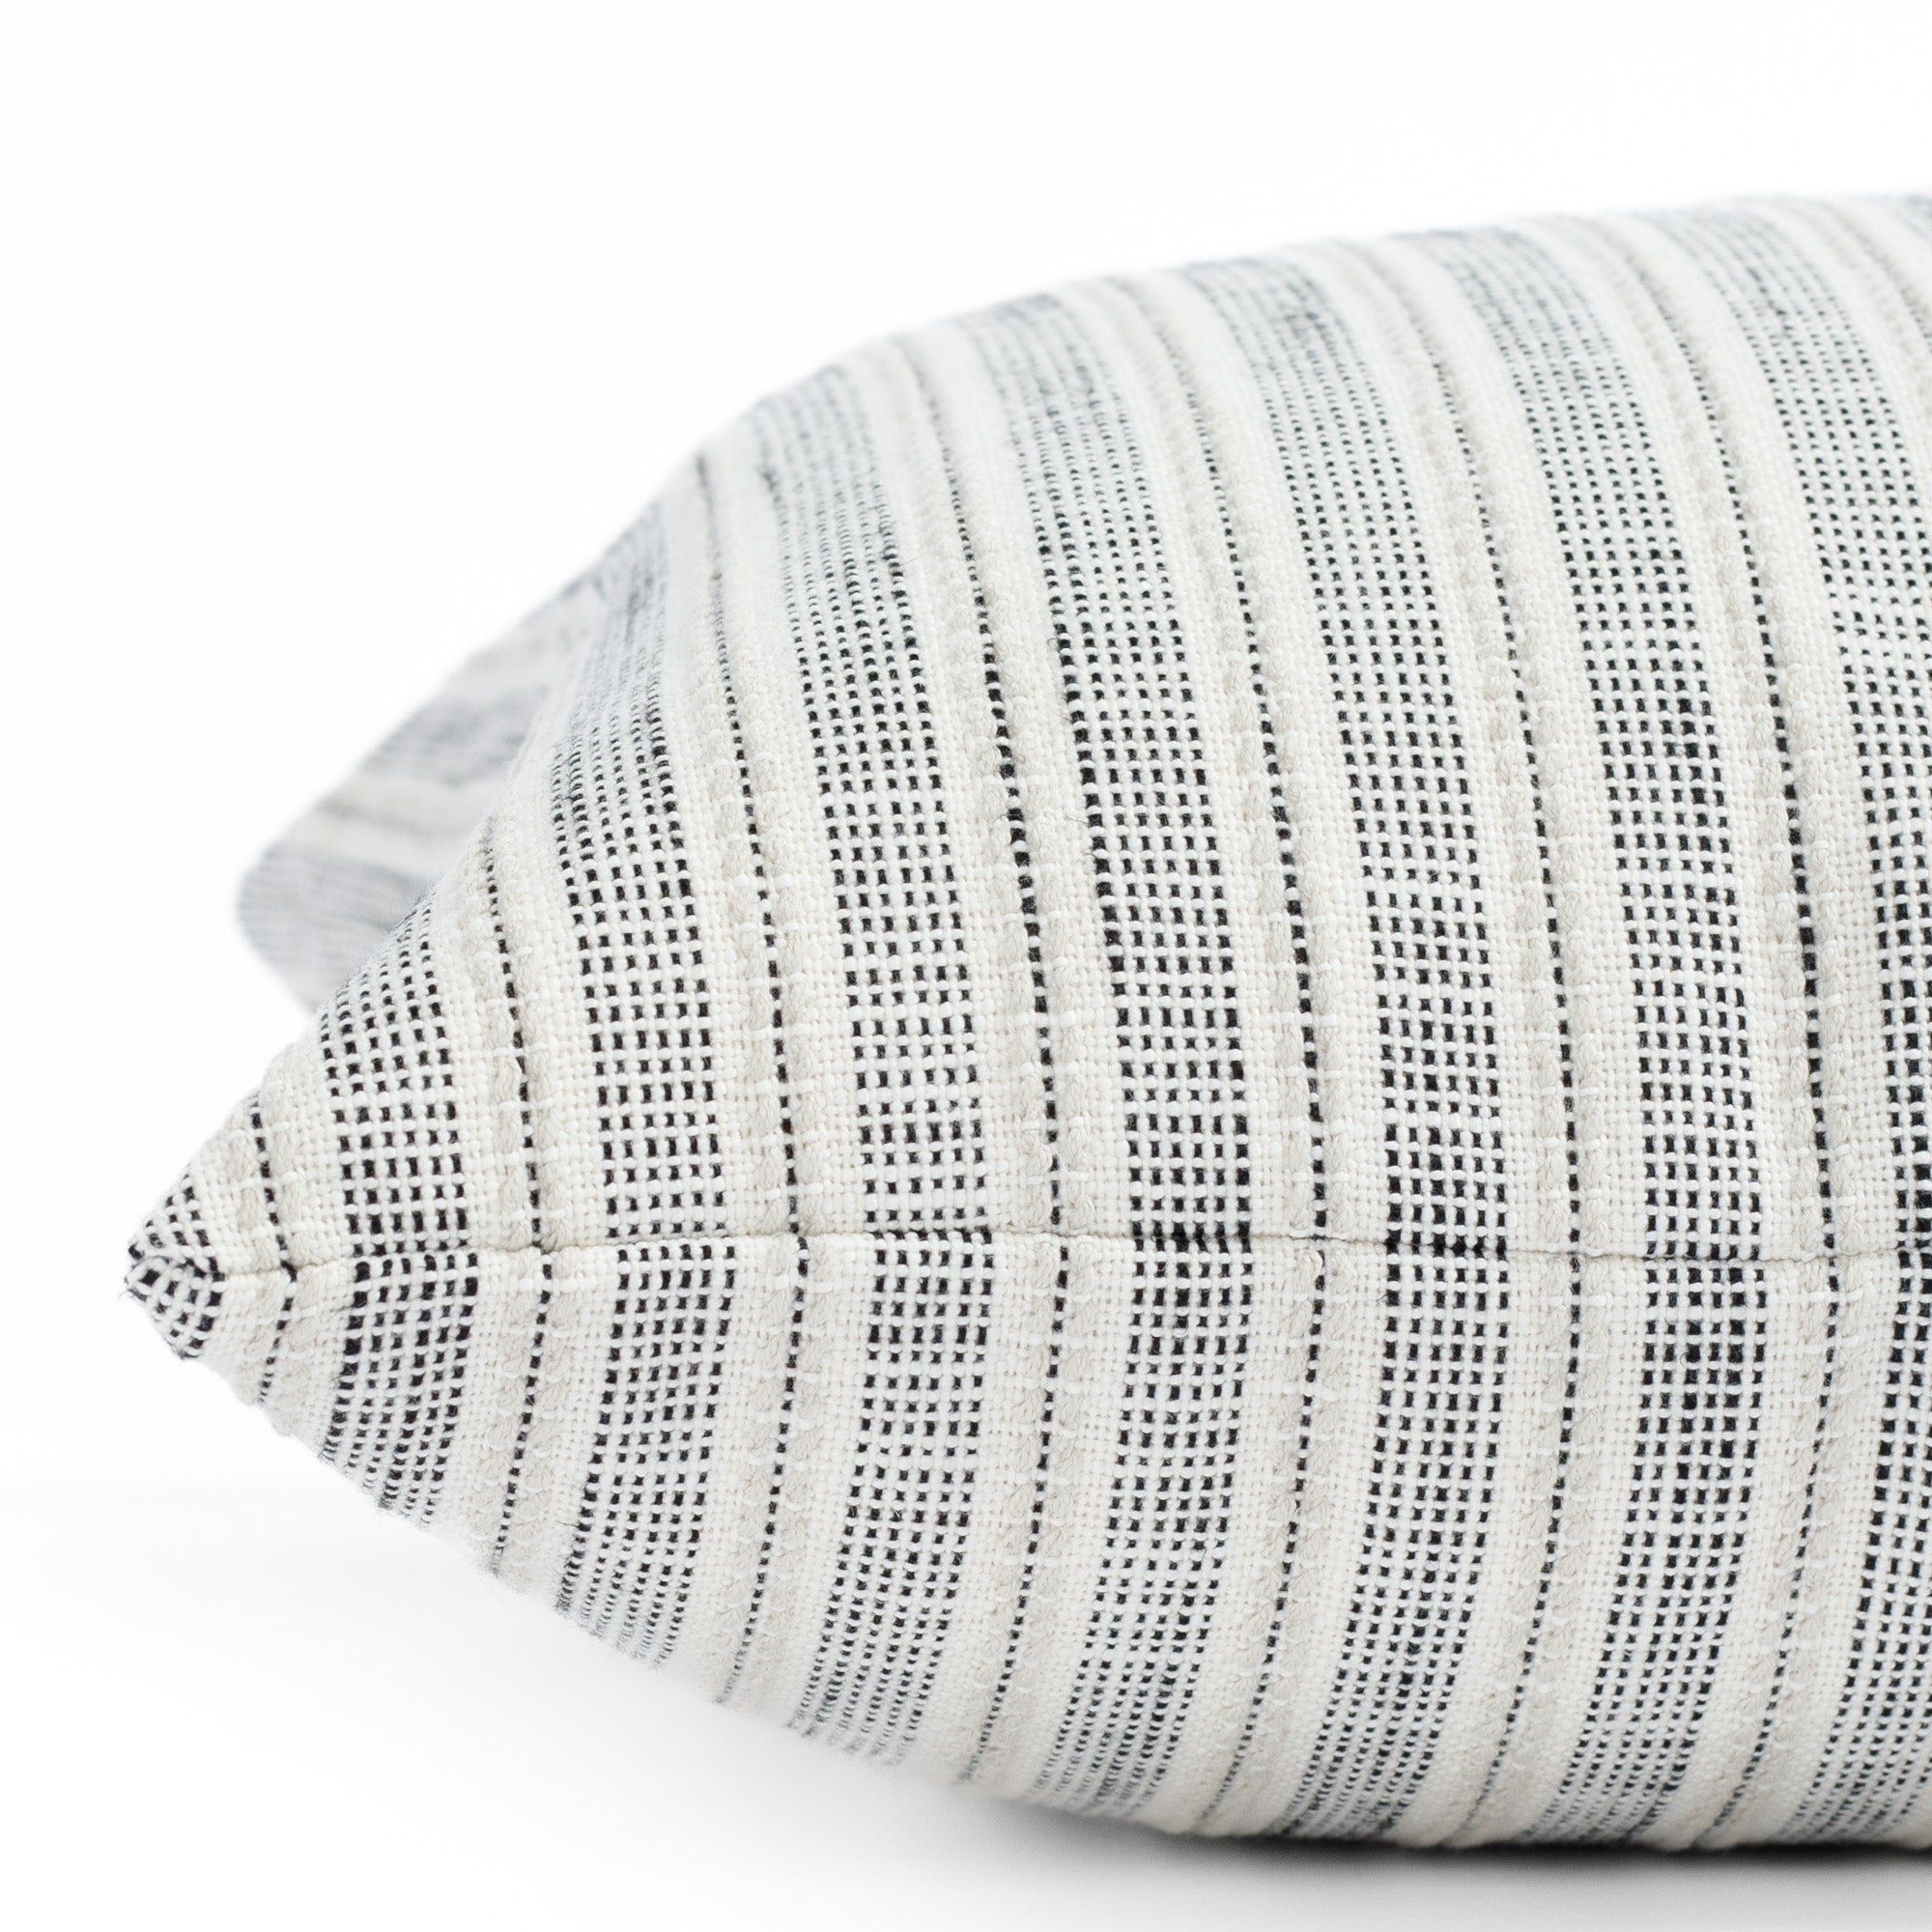 a cream and black stripe outdoor pillow : close up side view